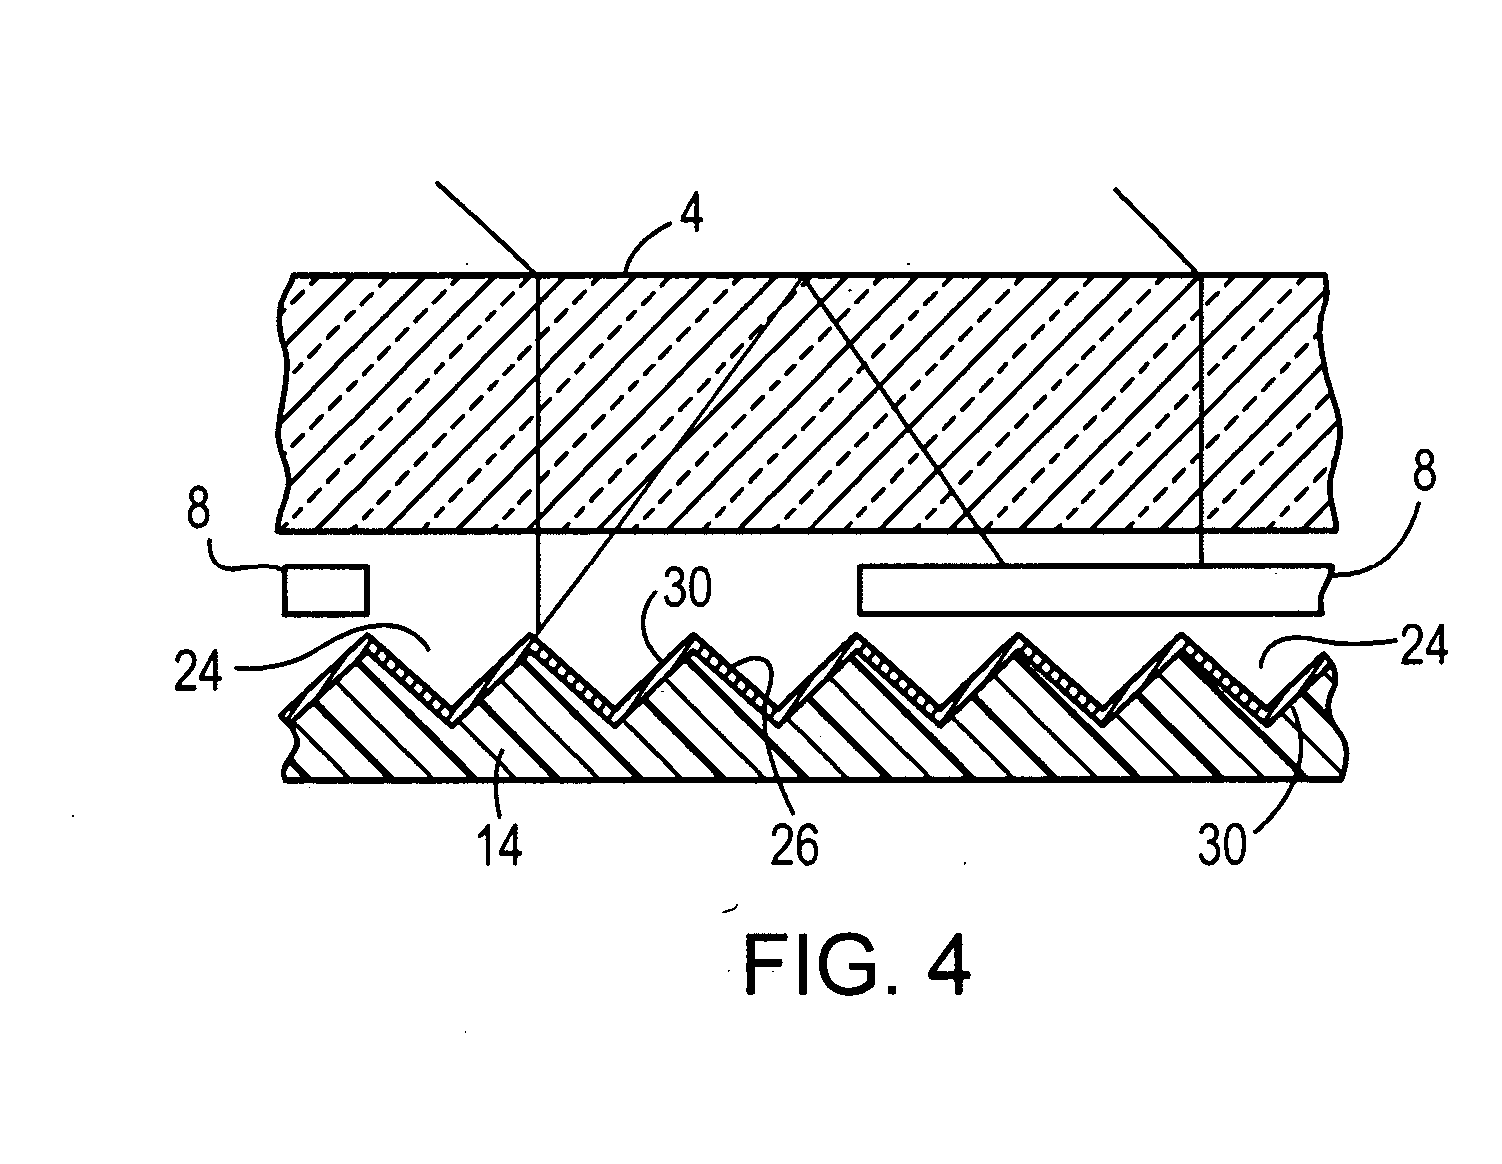 Photovoltaic module with light reflecting backskin